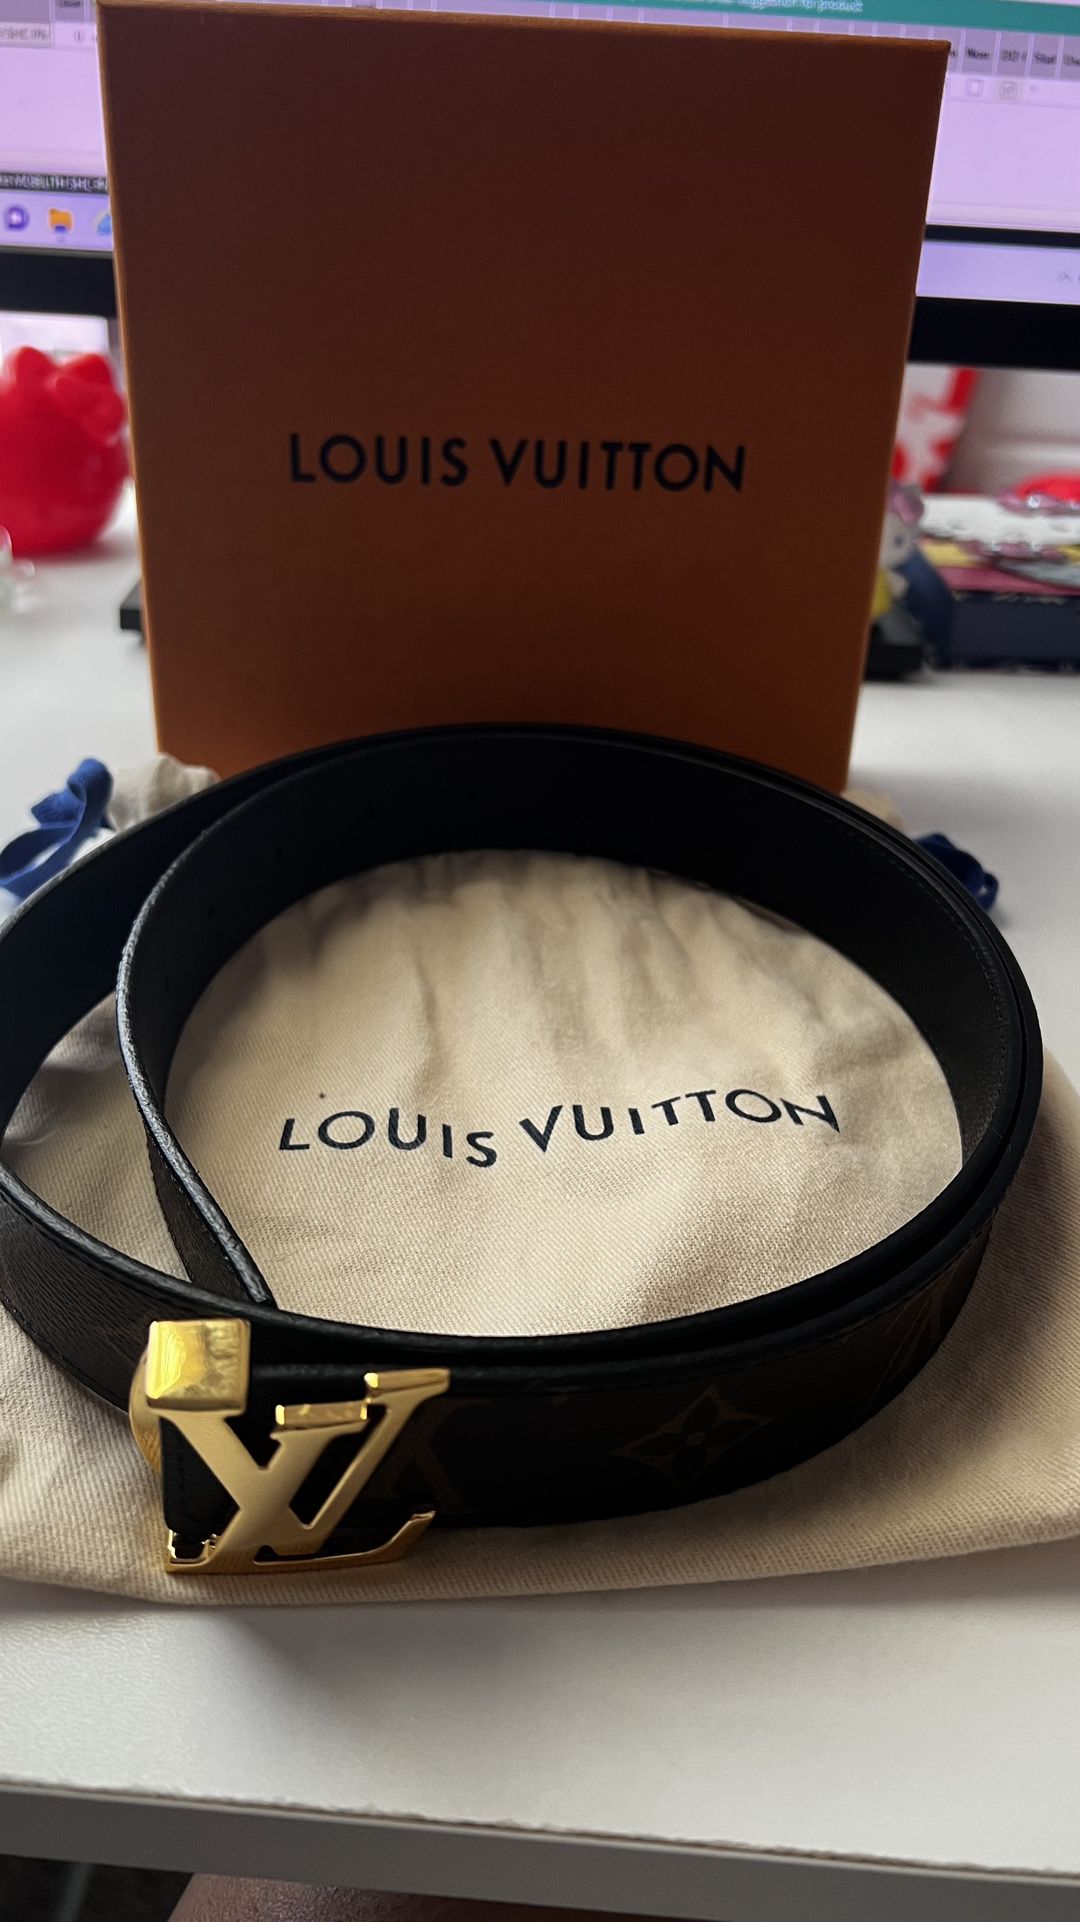 Louis Vuitton sunglasses for Sale in Charlotte, NC - OfferUp